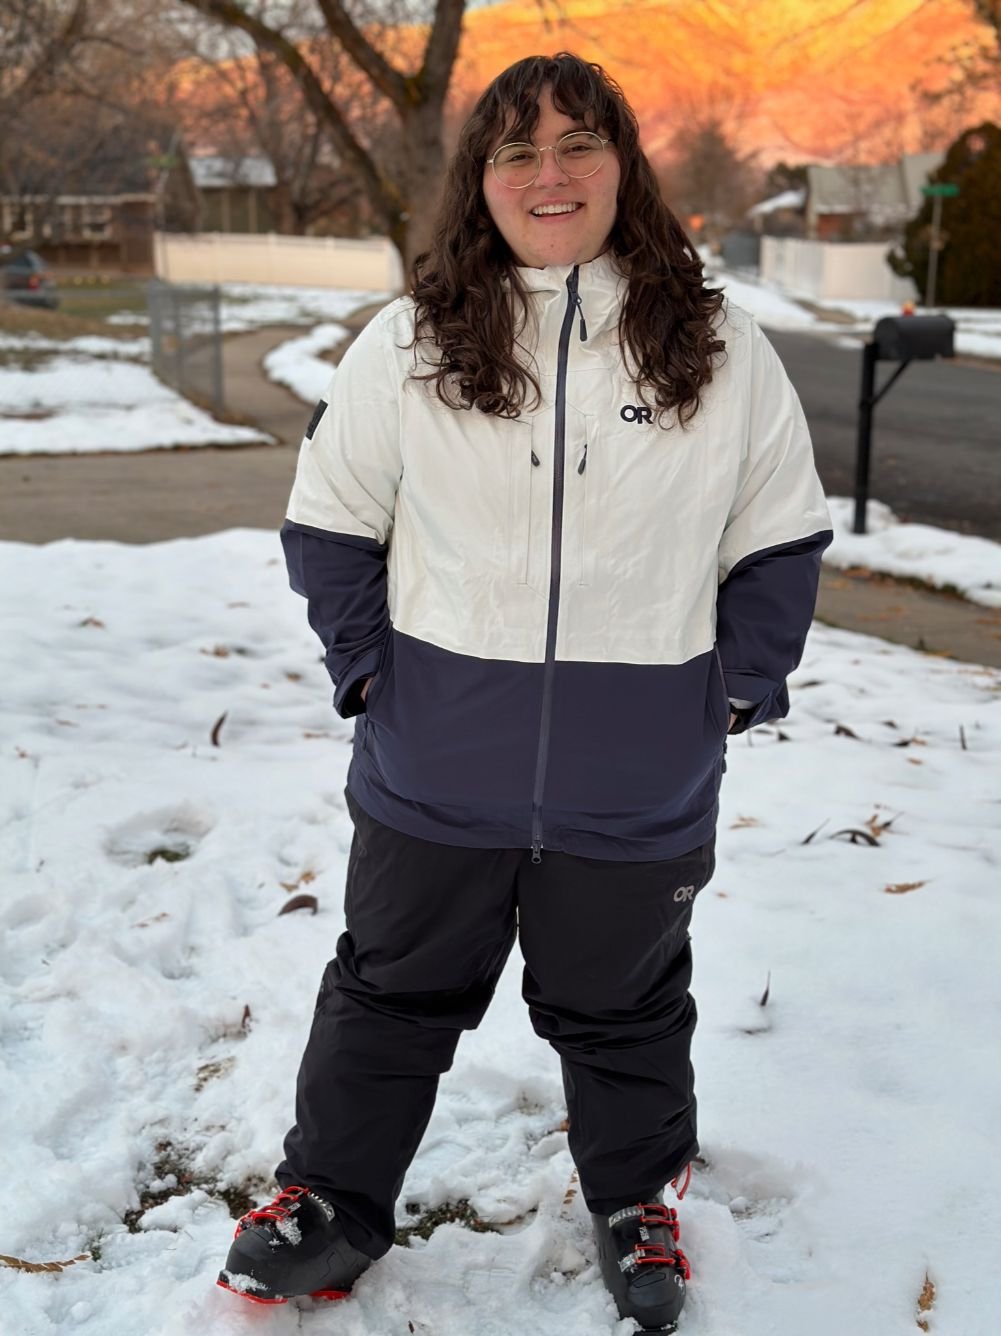 WinterProof™ Thermal Pants for Men and Women: Where Warmth Meets